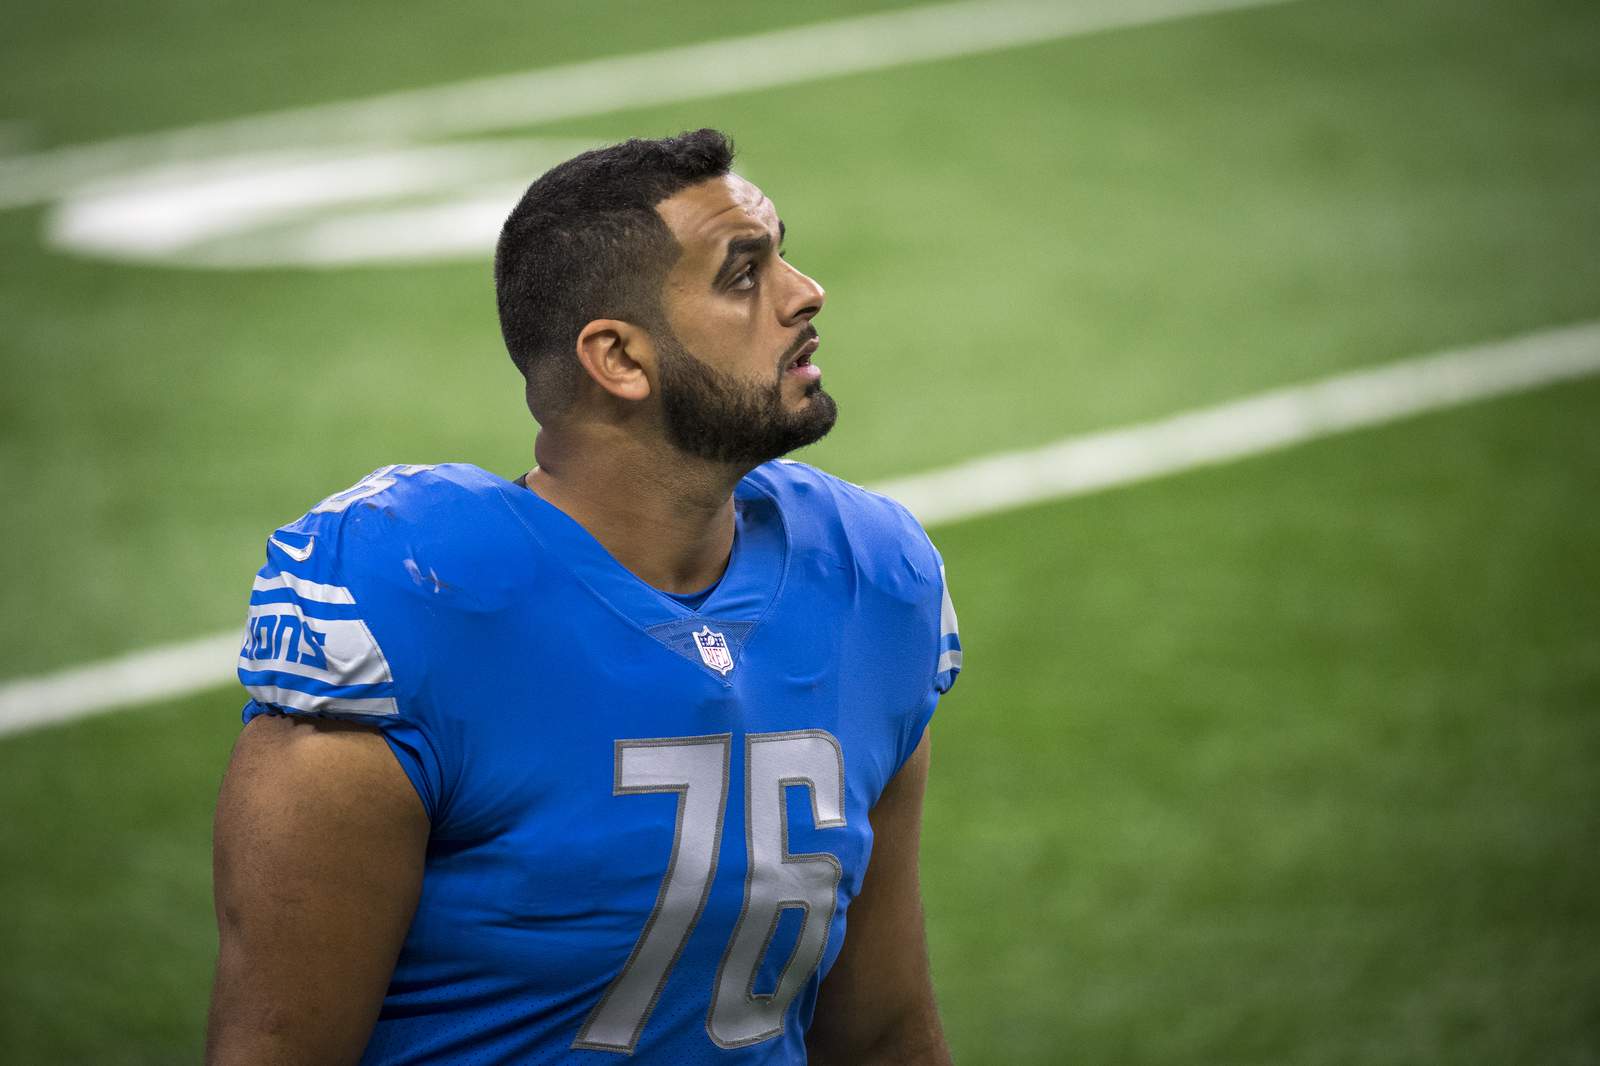 Detroit Lions player looks to shed light on Palestinians' plight